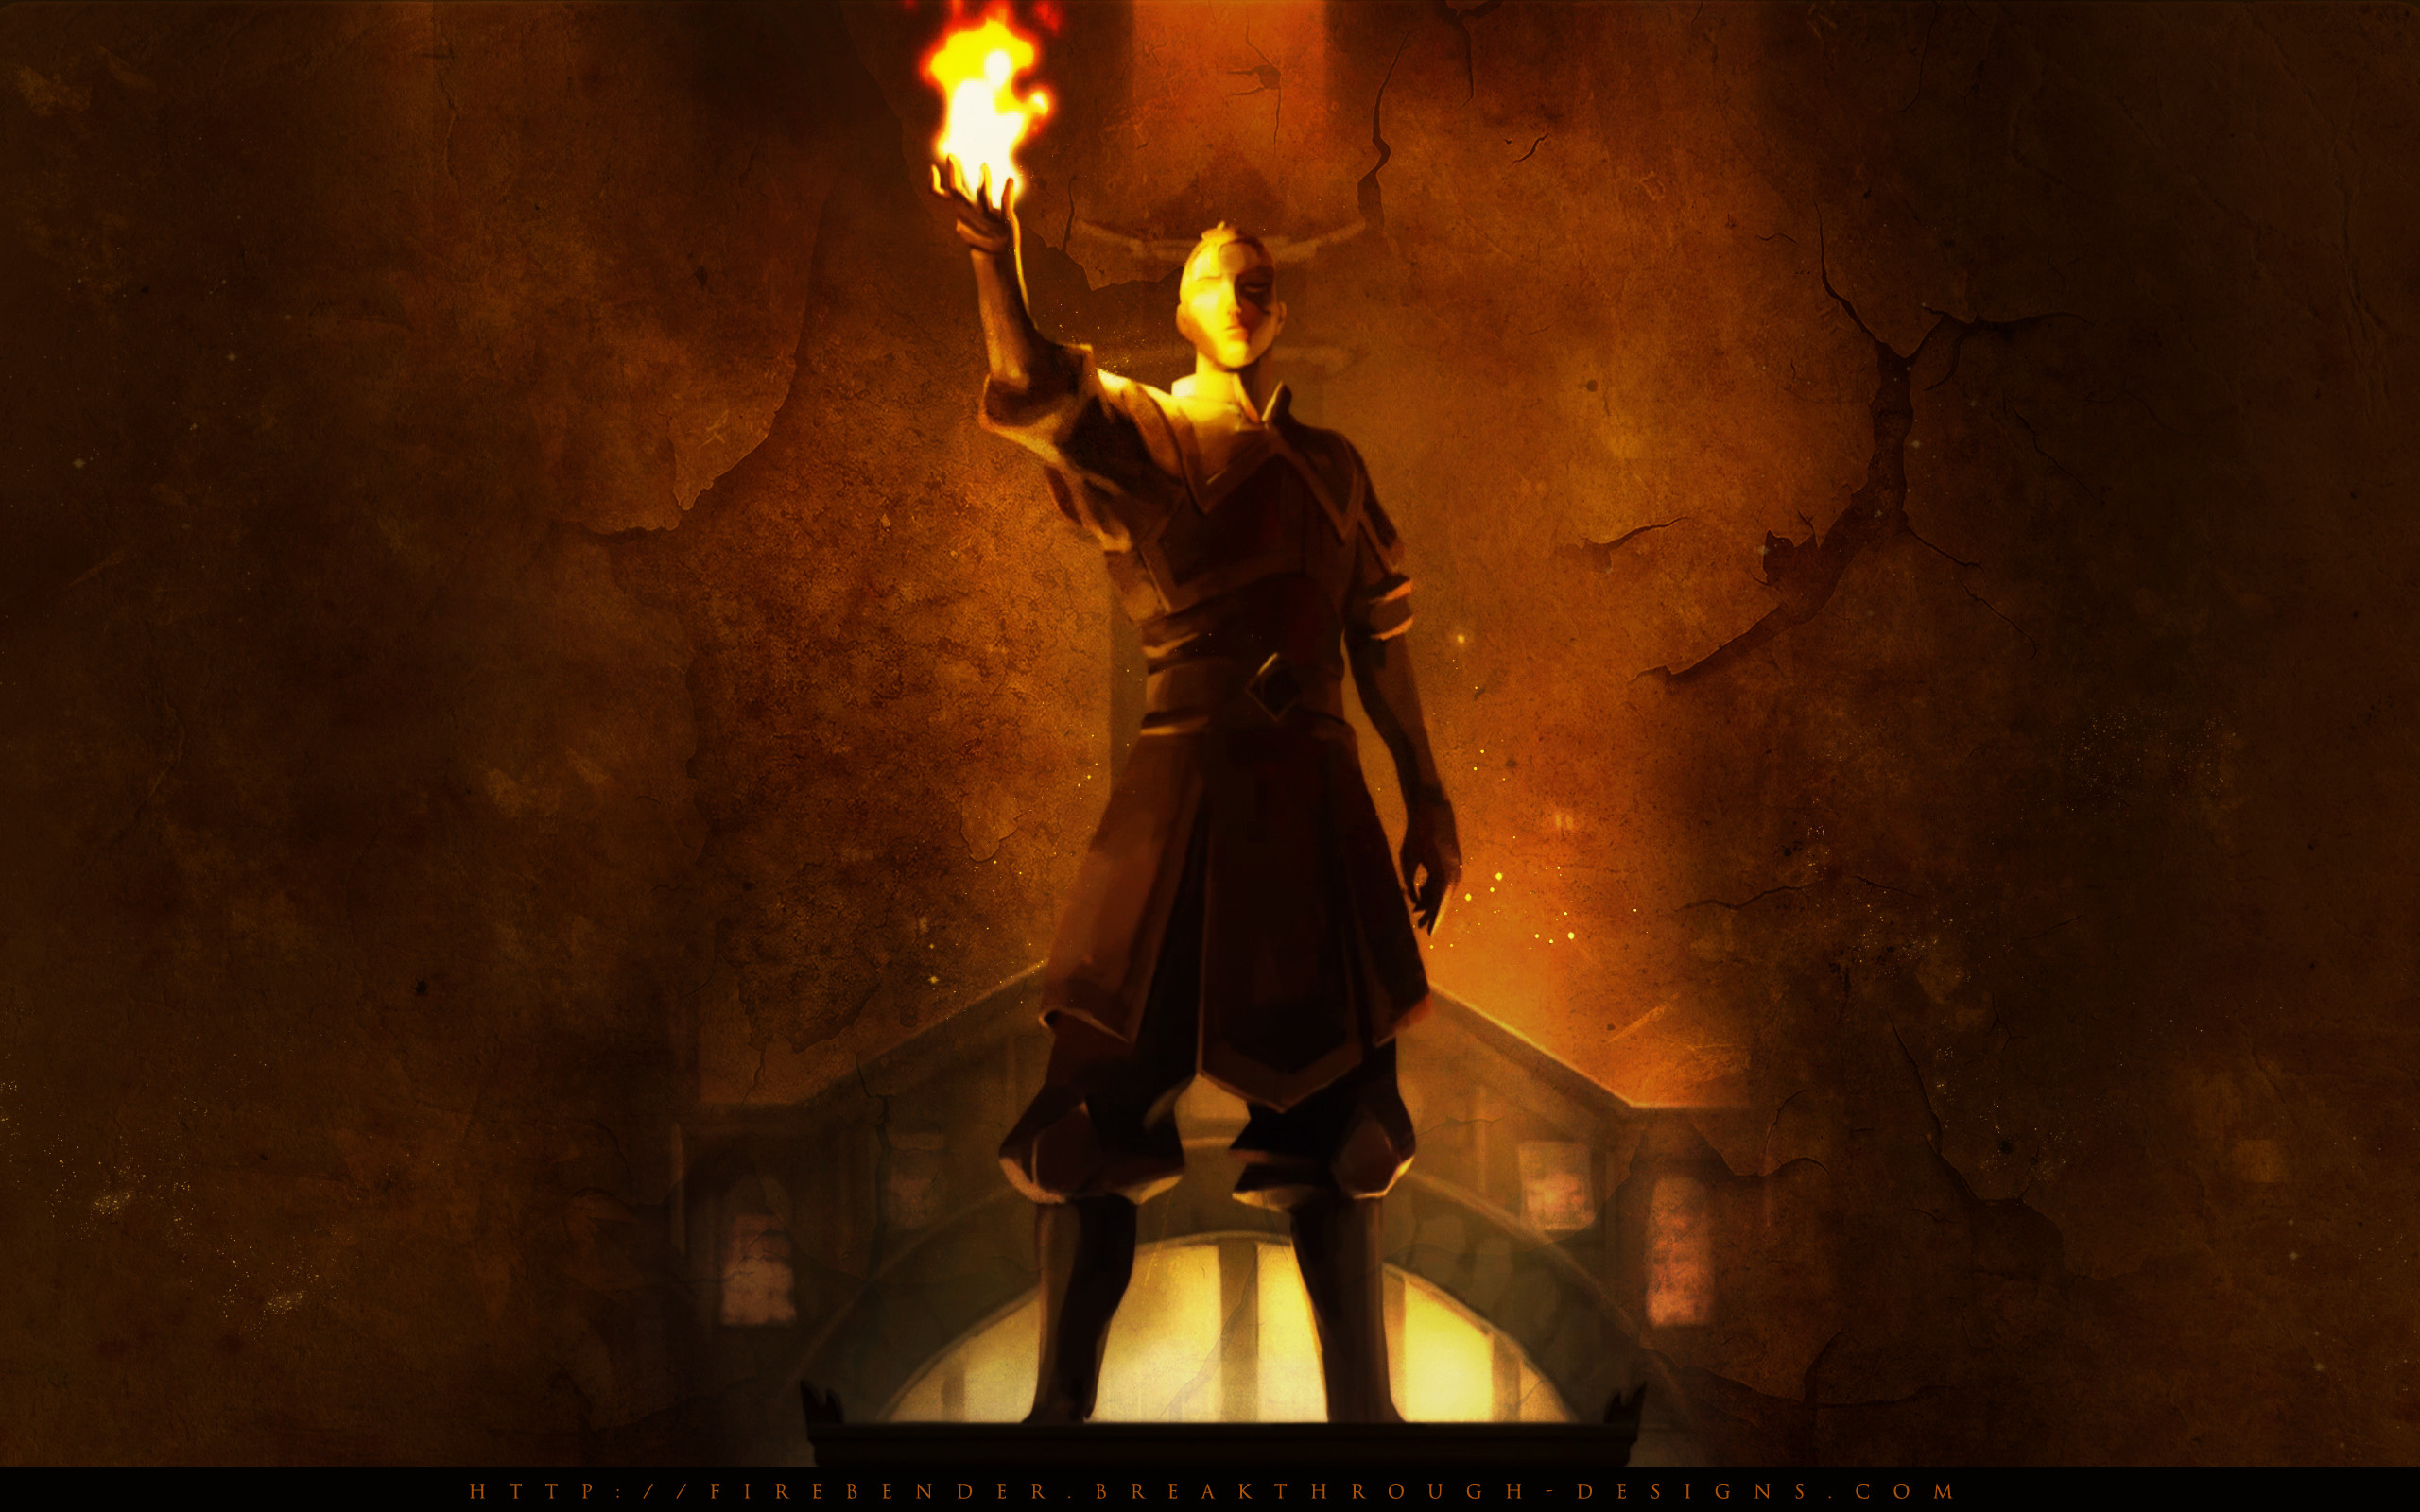 Wallpapers Page 2 Firebender 2560x1600 2560x1600